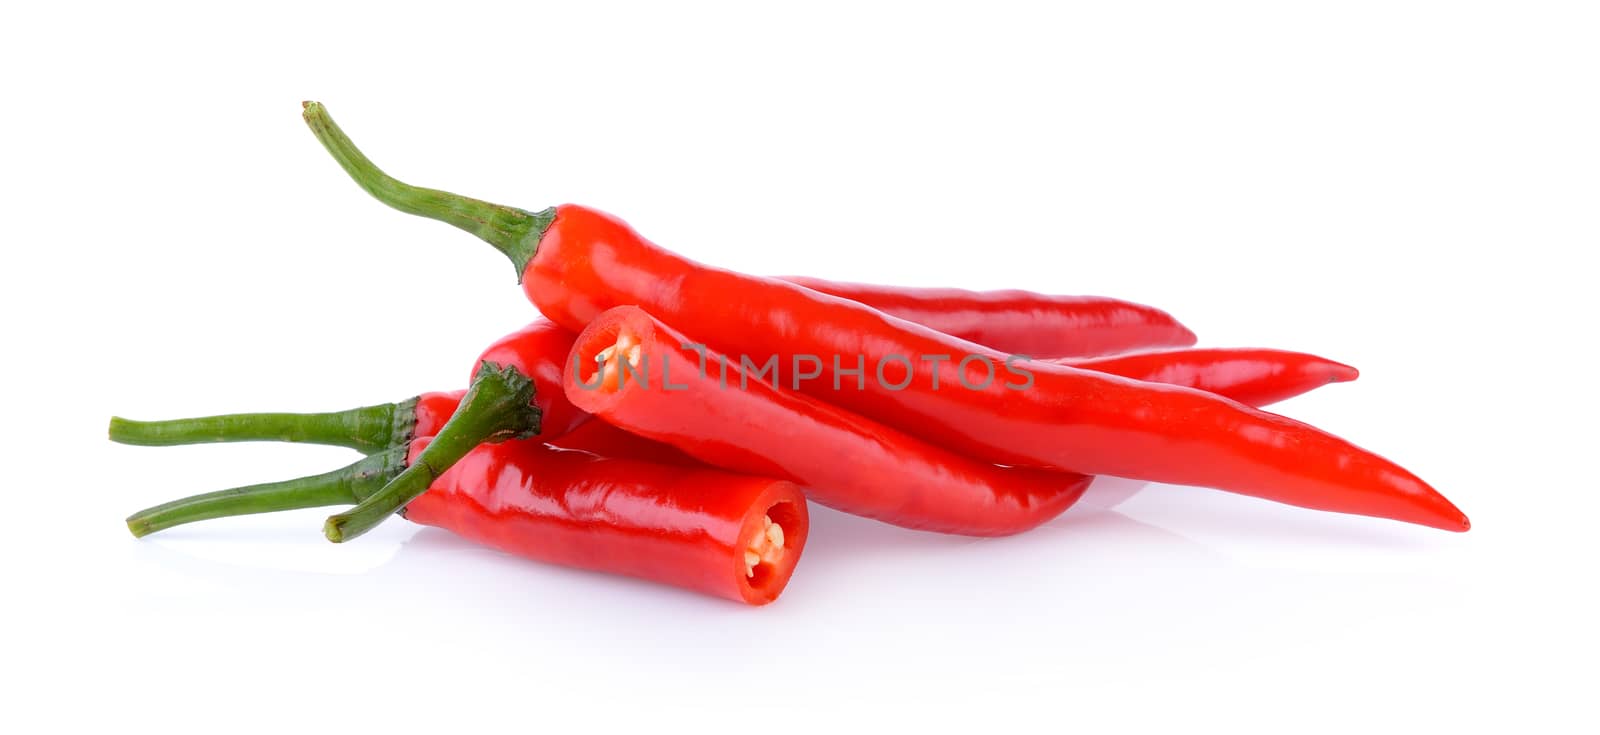 chili pepper on white baackground by sommai